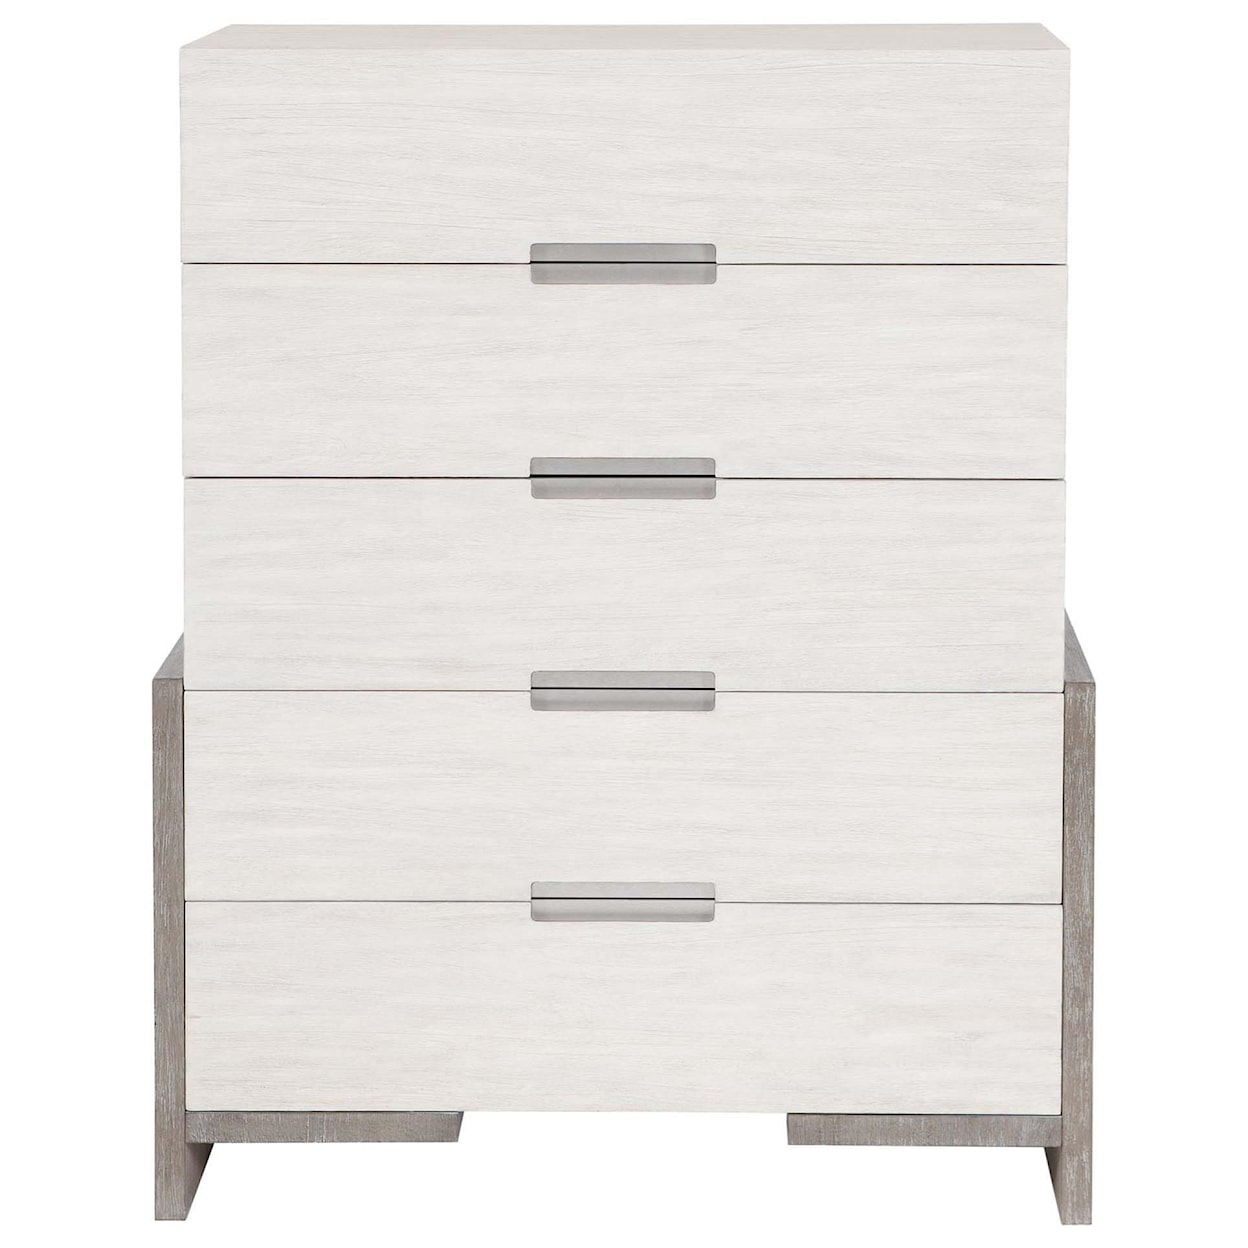 Bernhardt Foundations Foundations Tall Drawer Chest